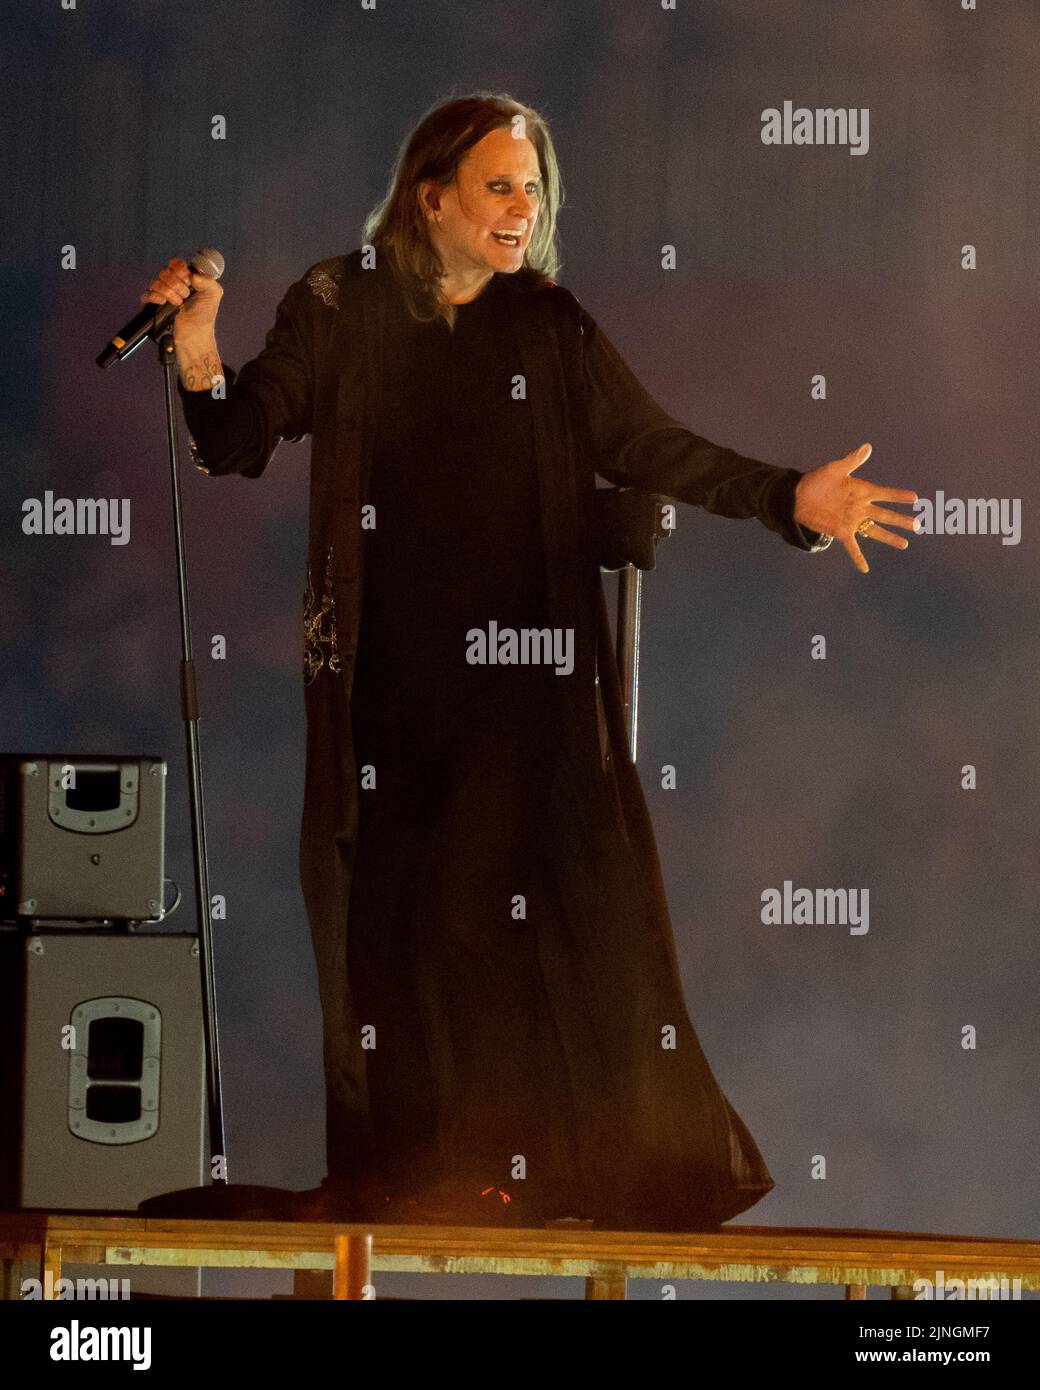 Ozzy Osbourne Stages Surprise Black Sabbath Reunion at 2022 Commonwealth Games Closing Ceremony Stock Photo